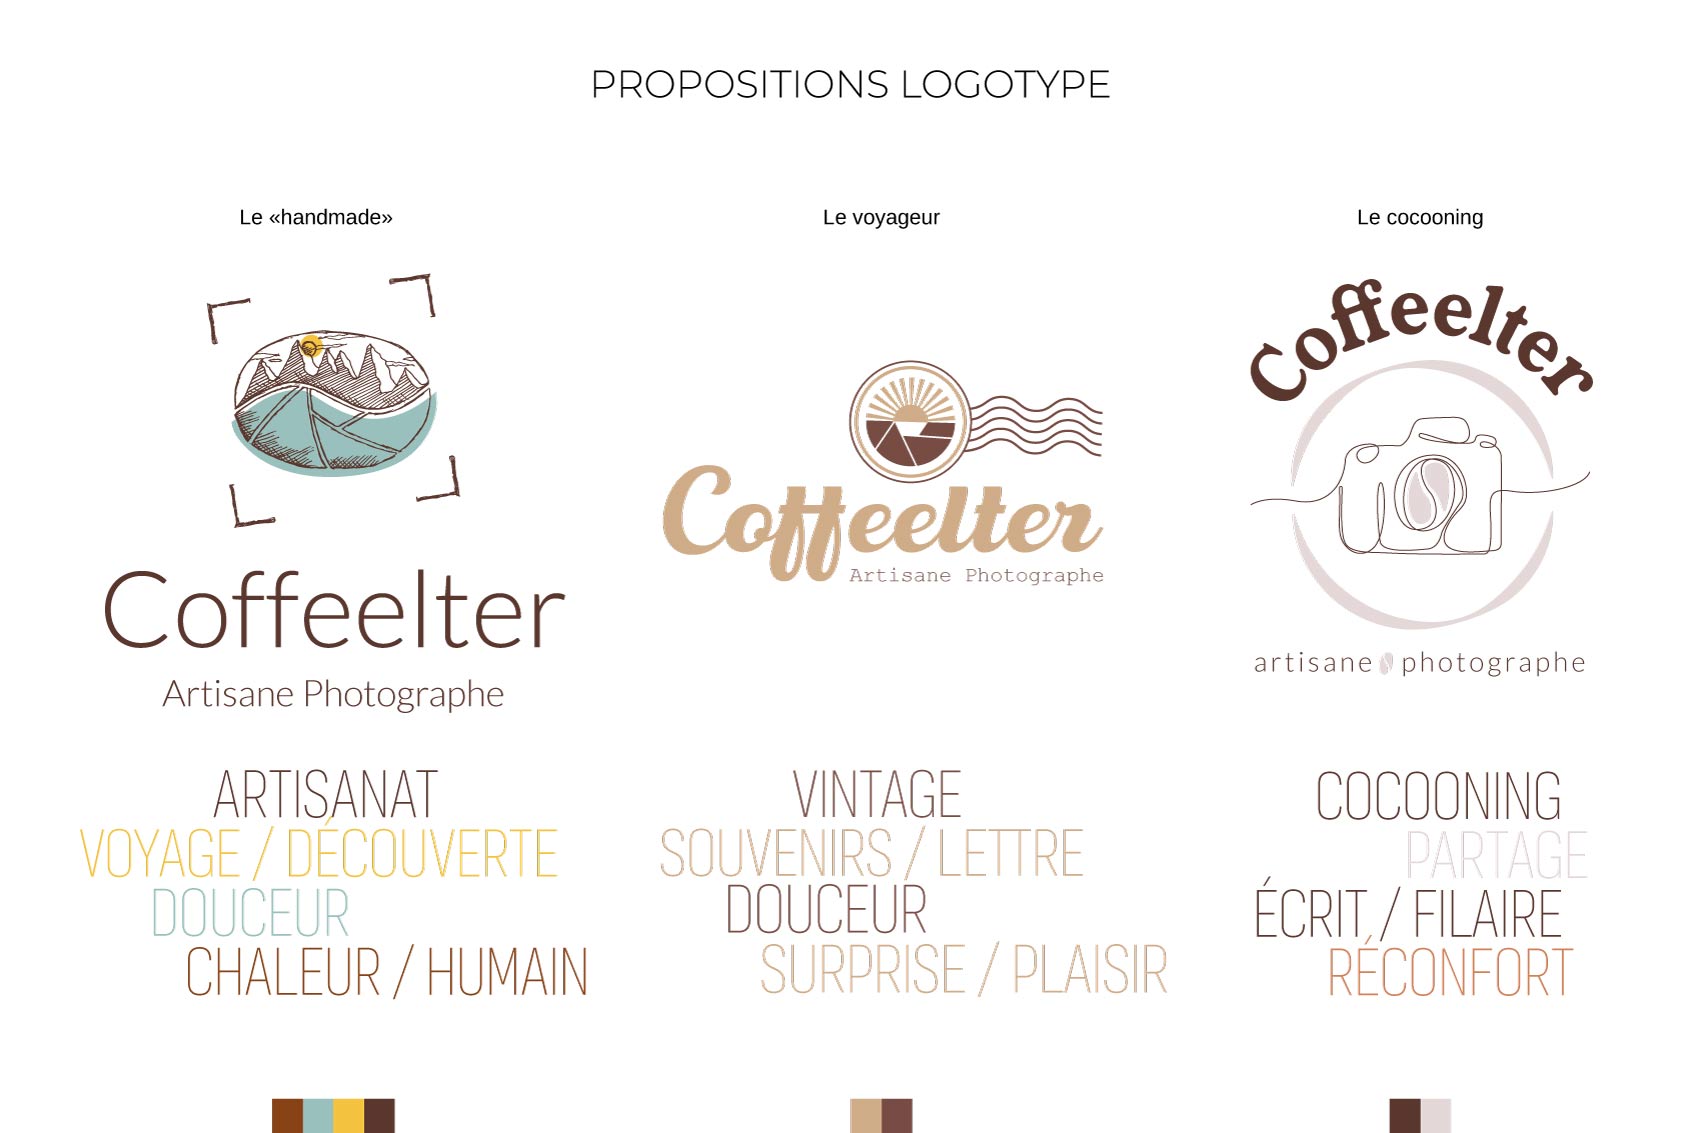 Propositions de logotypes Coffeelter